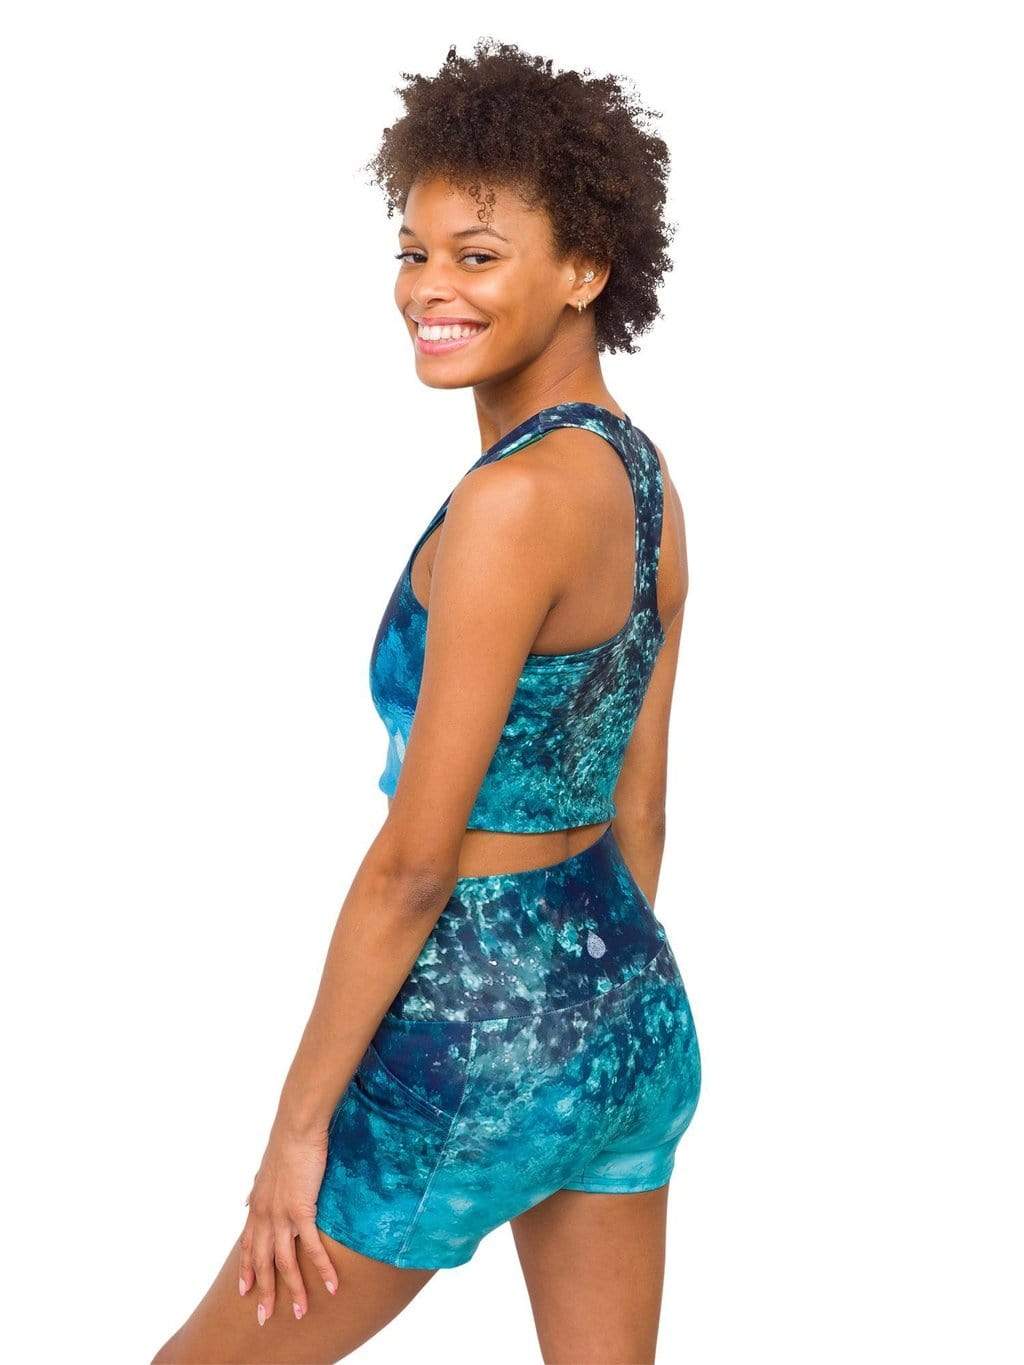 Model: Syriah is a sea turtle conservation biologist. She is 5&#39;7&quot;, 111 lbs and is wearing a size XS top and shorts.